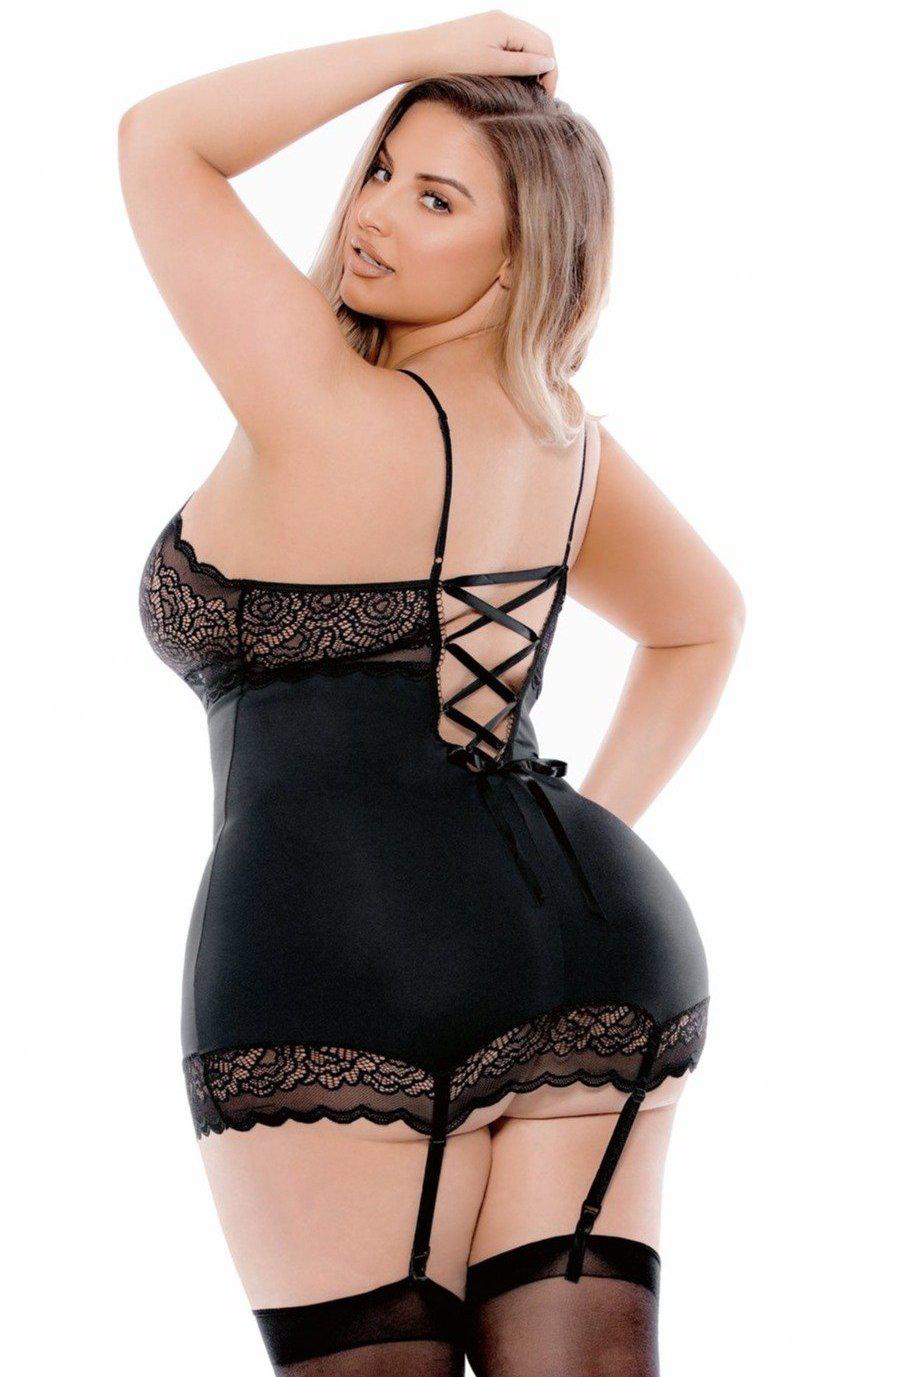 Plus Size Bustier with Stockings-Bustiers-Escante-SEXYSHOES.COM